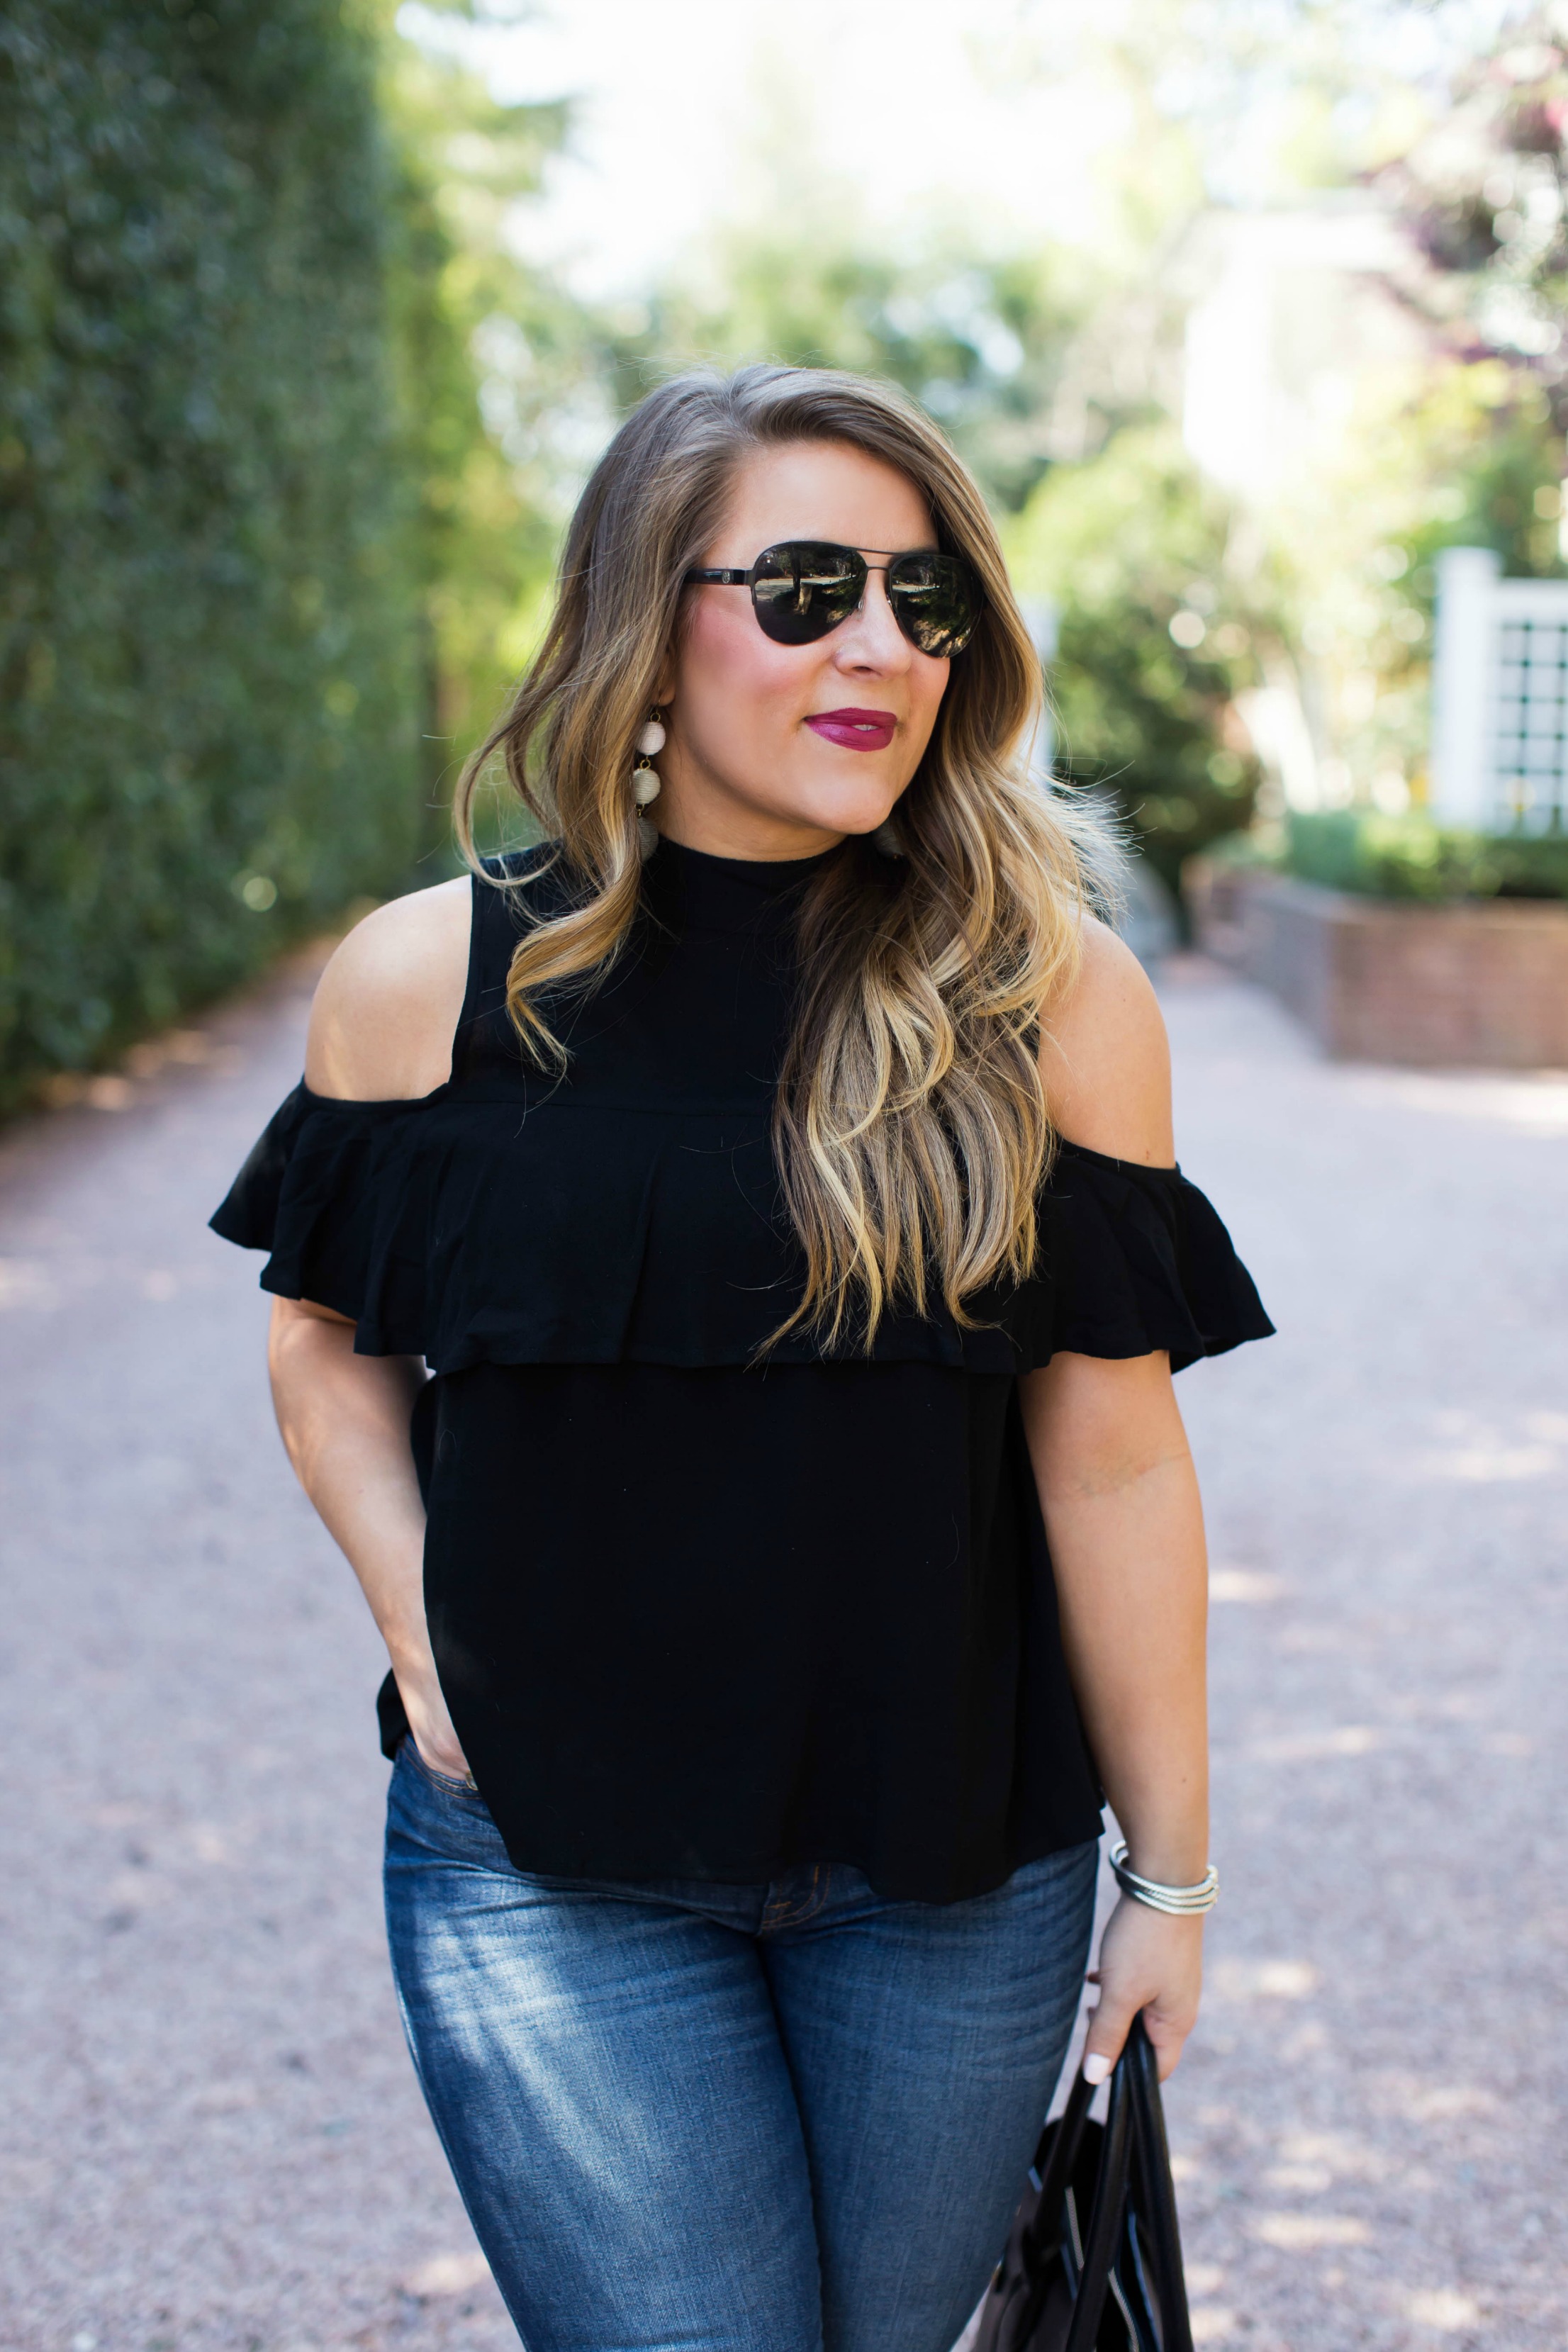 Cold Shoulder Tops and Why You Can Wear Them (Even if You Think